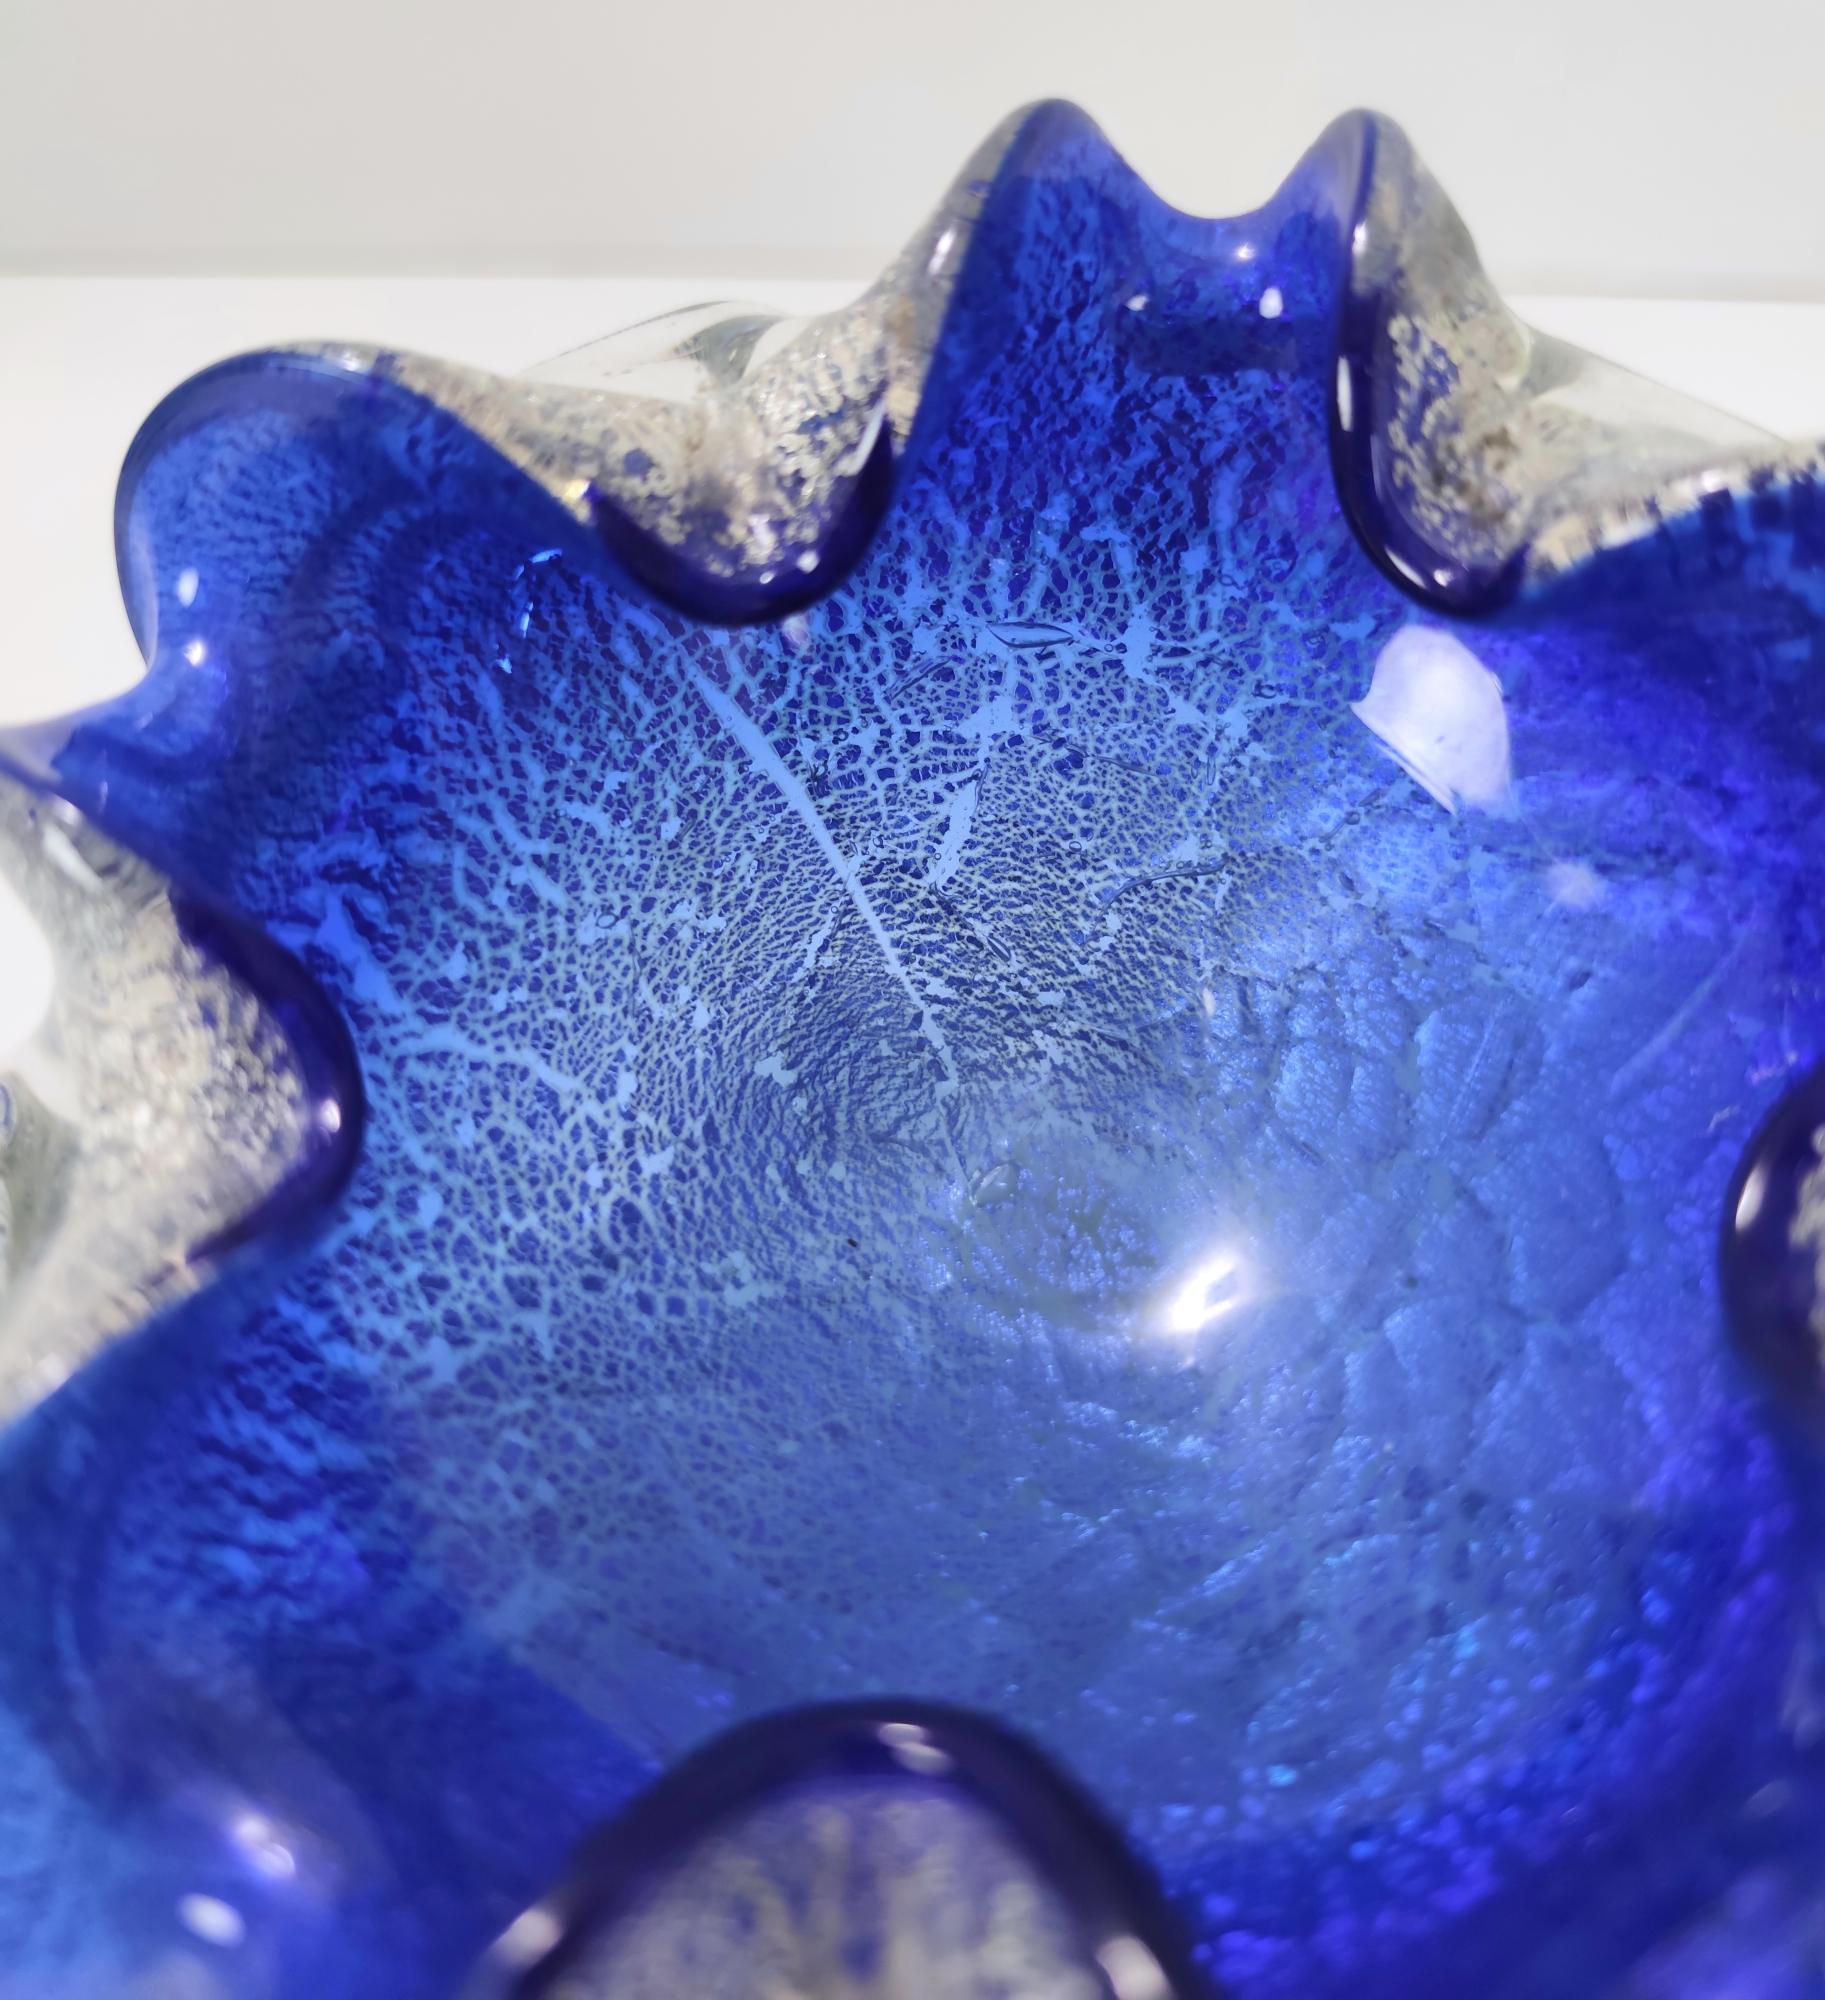 Vintage Blue Murano Glass Ashtray-Catchall Ascribable to Toso with Silver Flakes 2